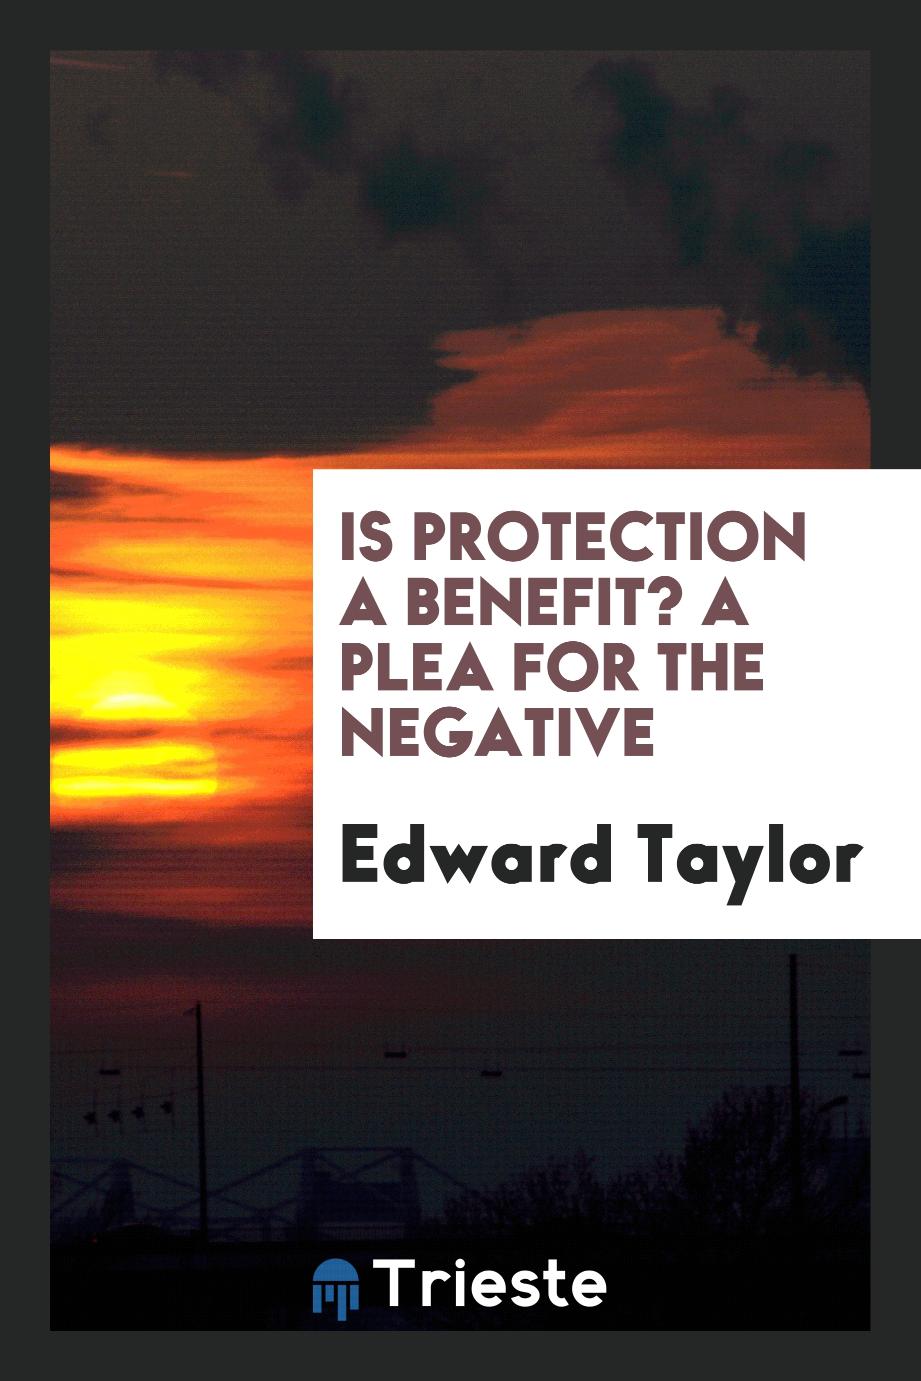 Is protection a benefit? A plea for the negative